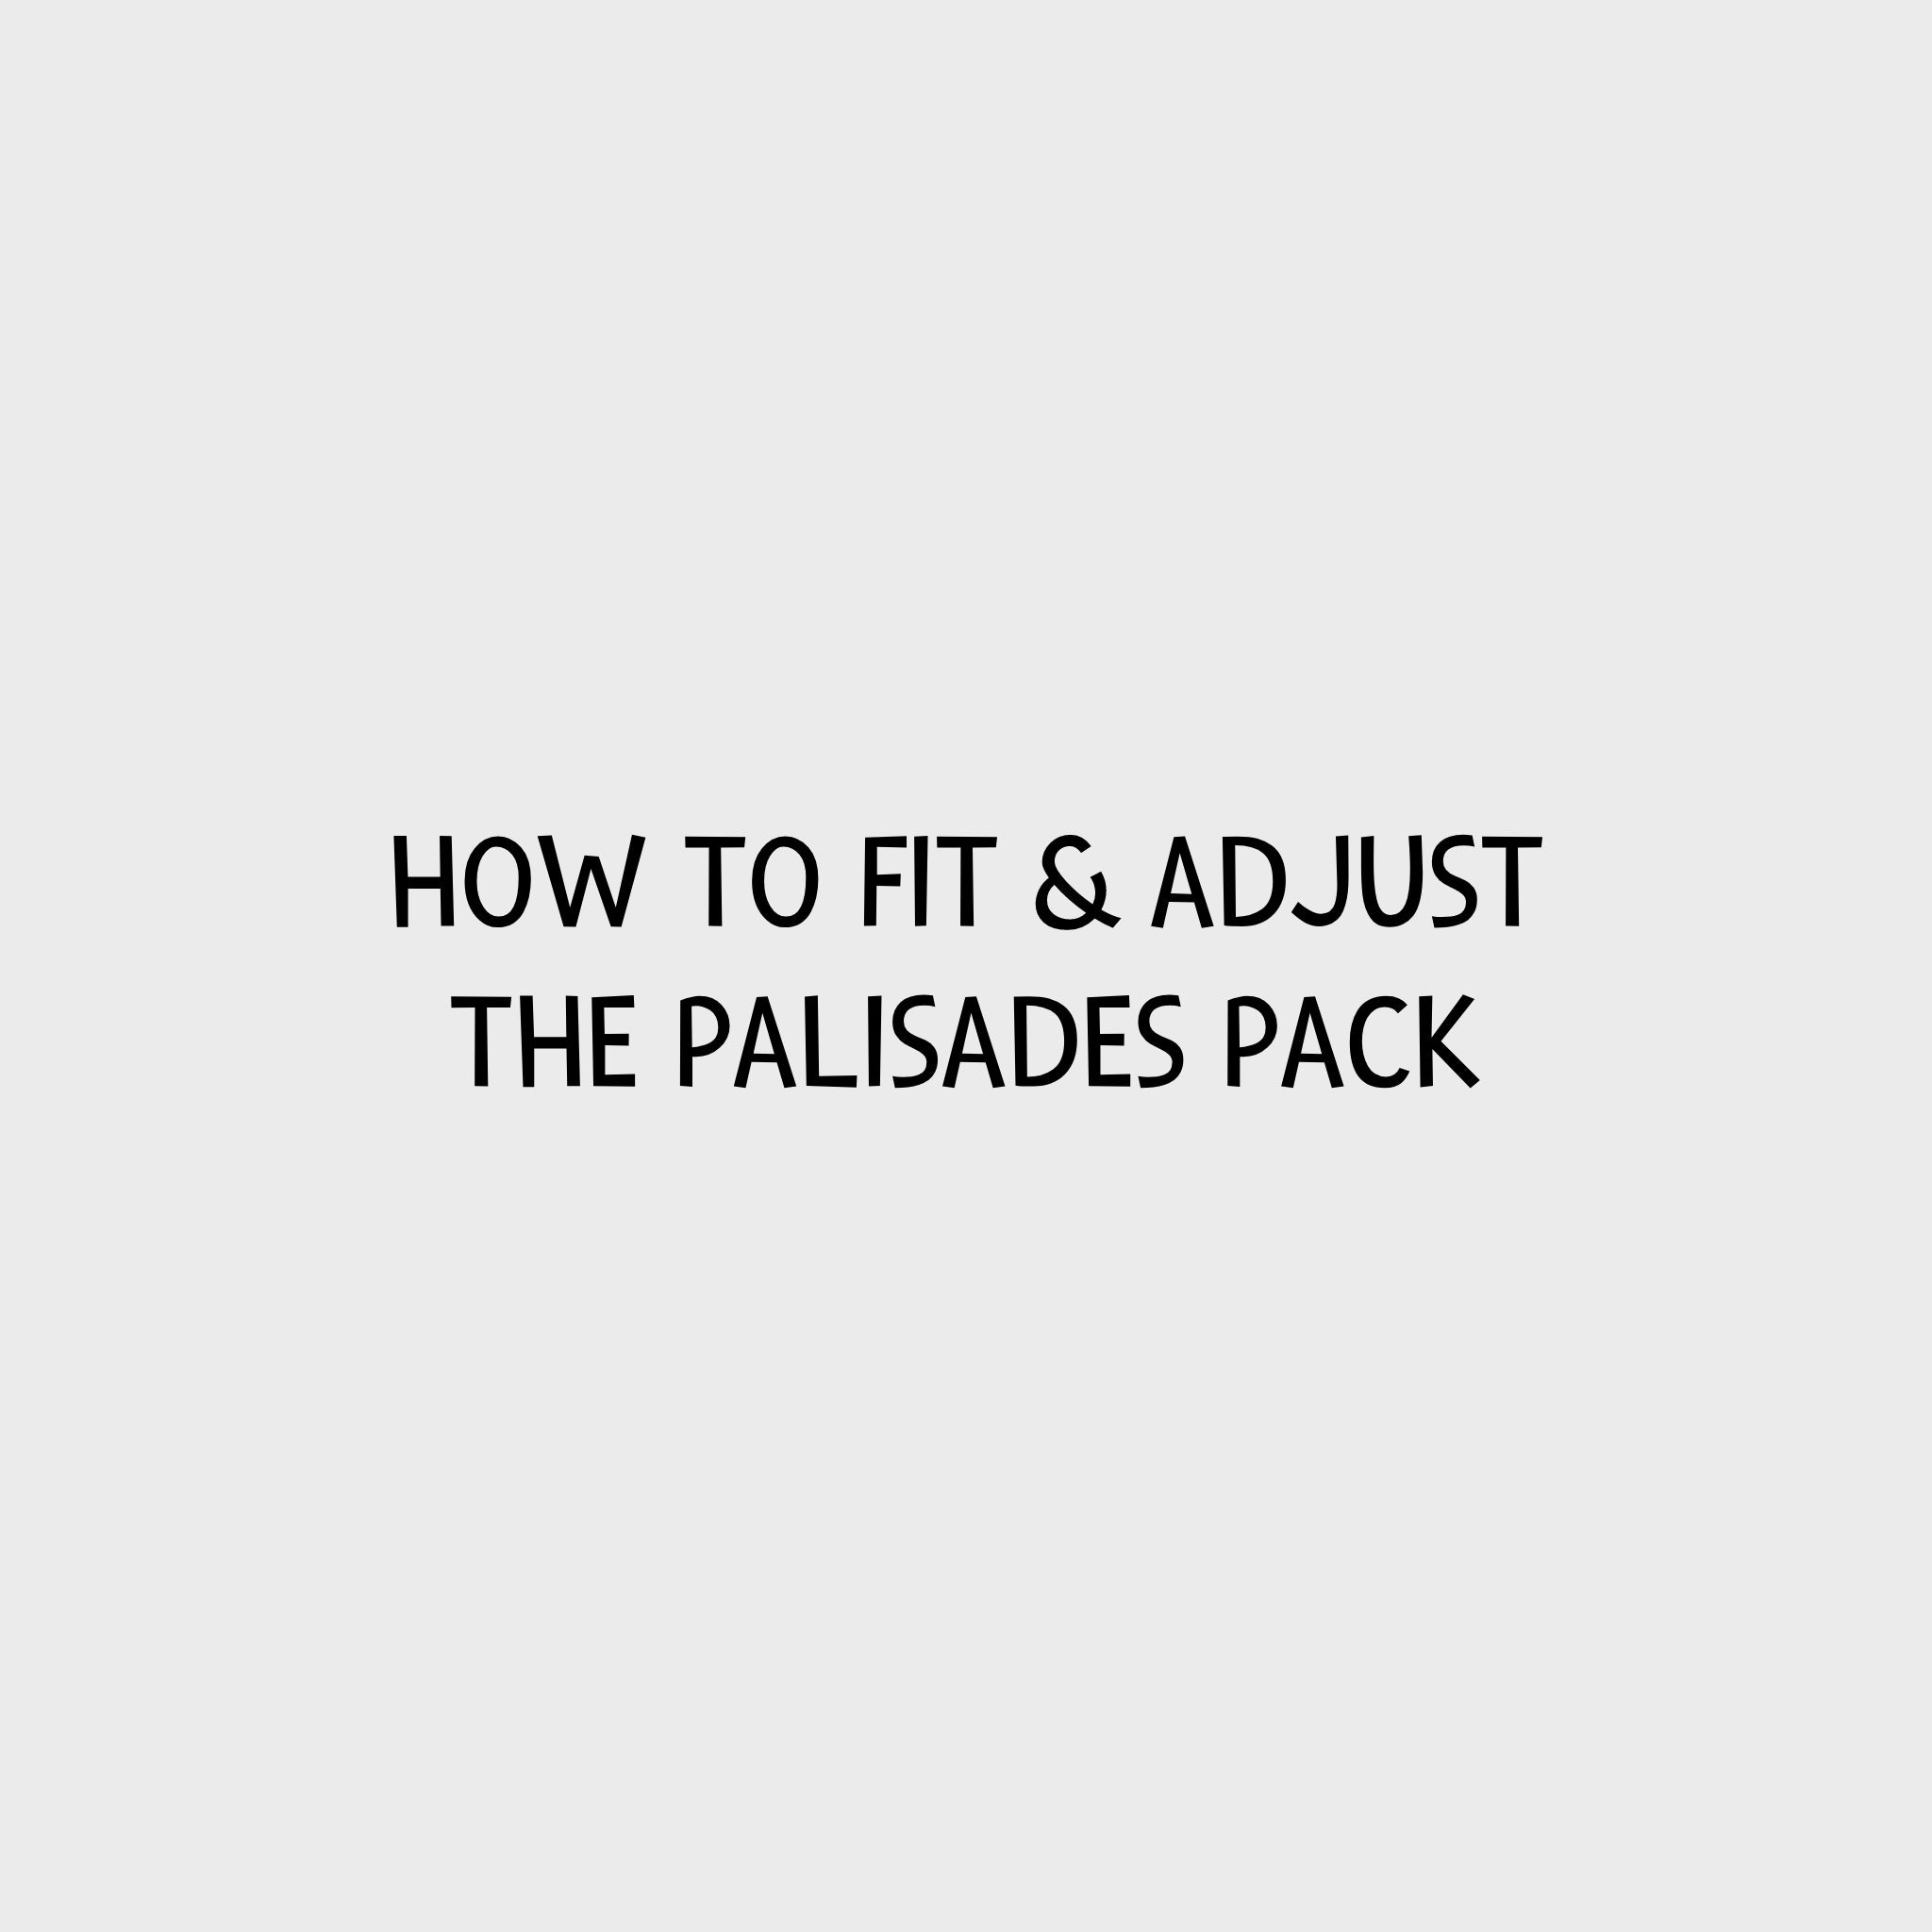 Video - How to Fit & Adjust the Ruffwear Palisades Pack